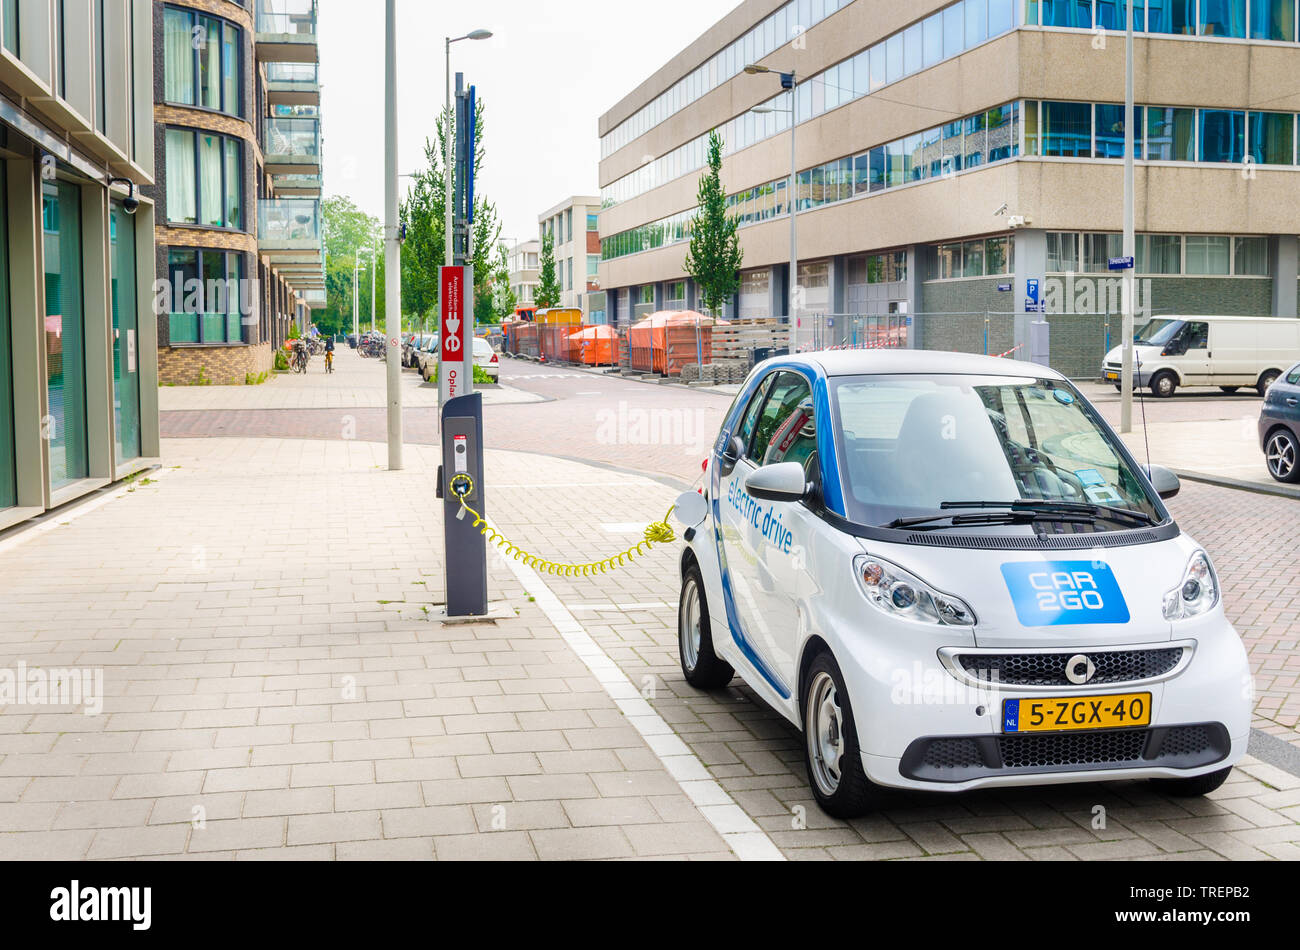 Amsterdam, The Netherlands - June 12, 2016: Car2Go Electric Car being Charged. Car2go is carsharing service available in Europe and North America. Stock Photo